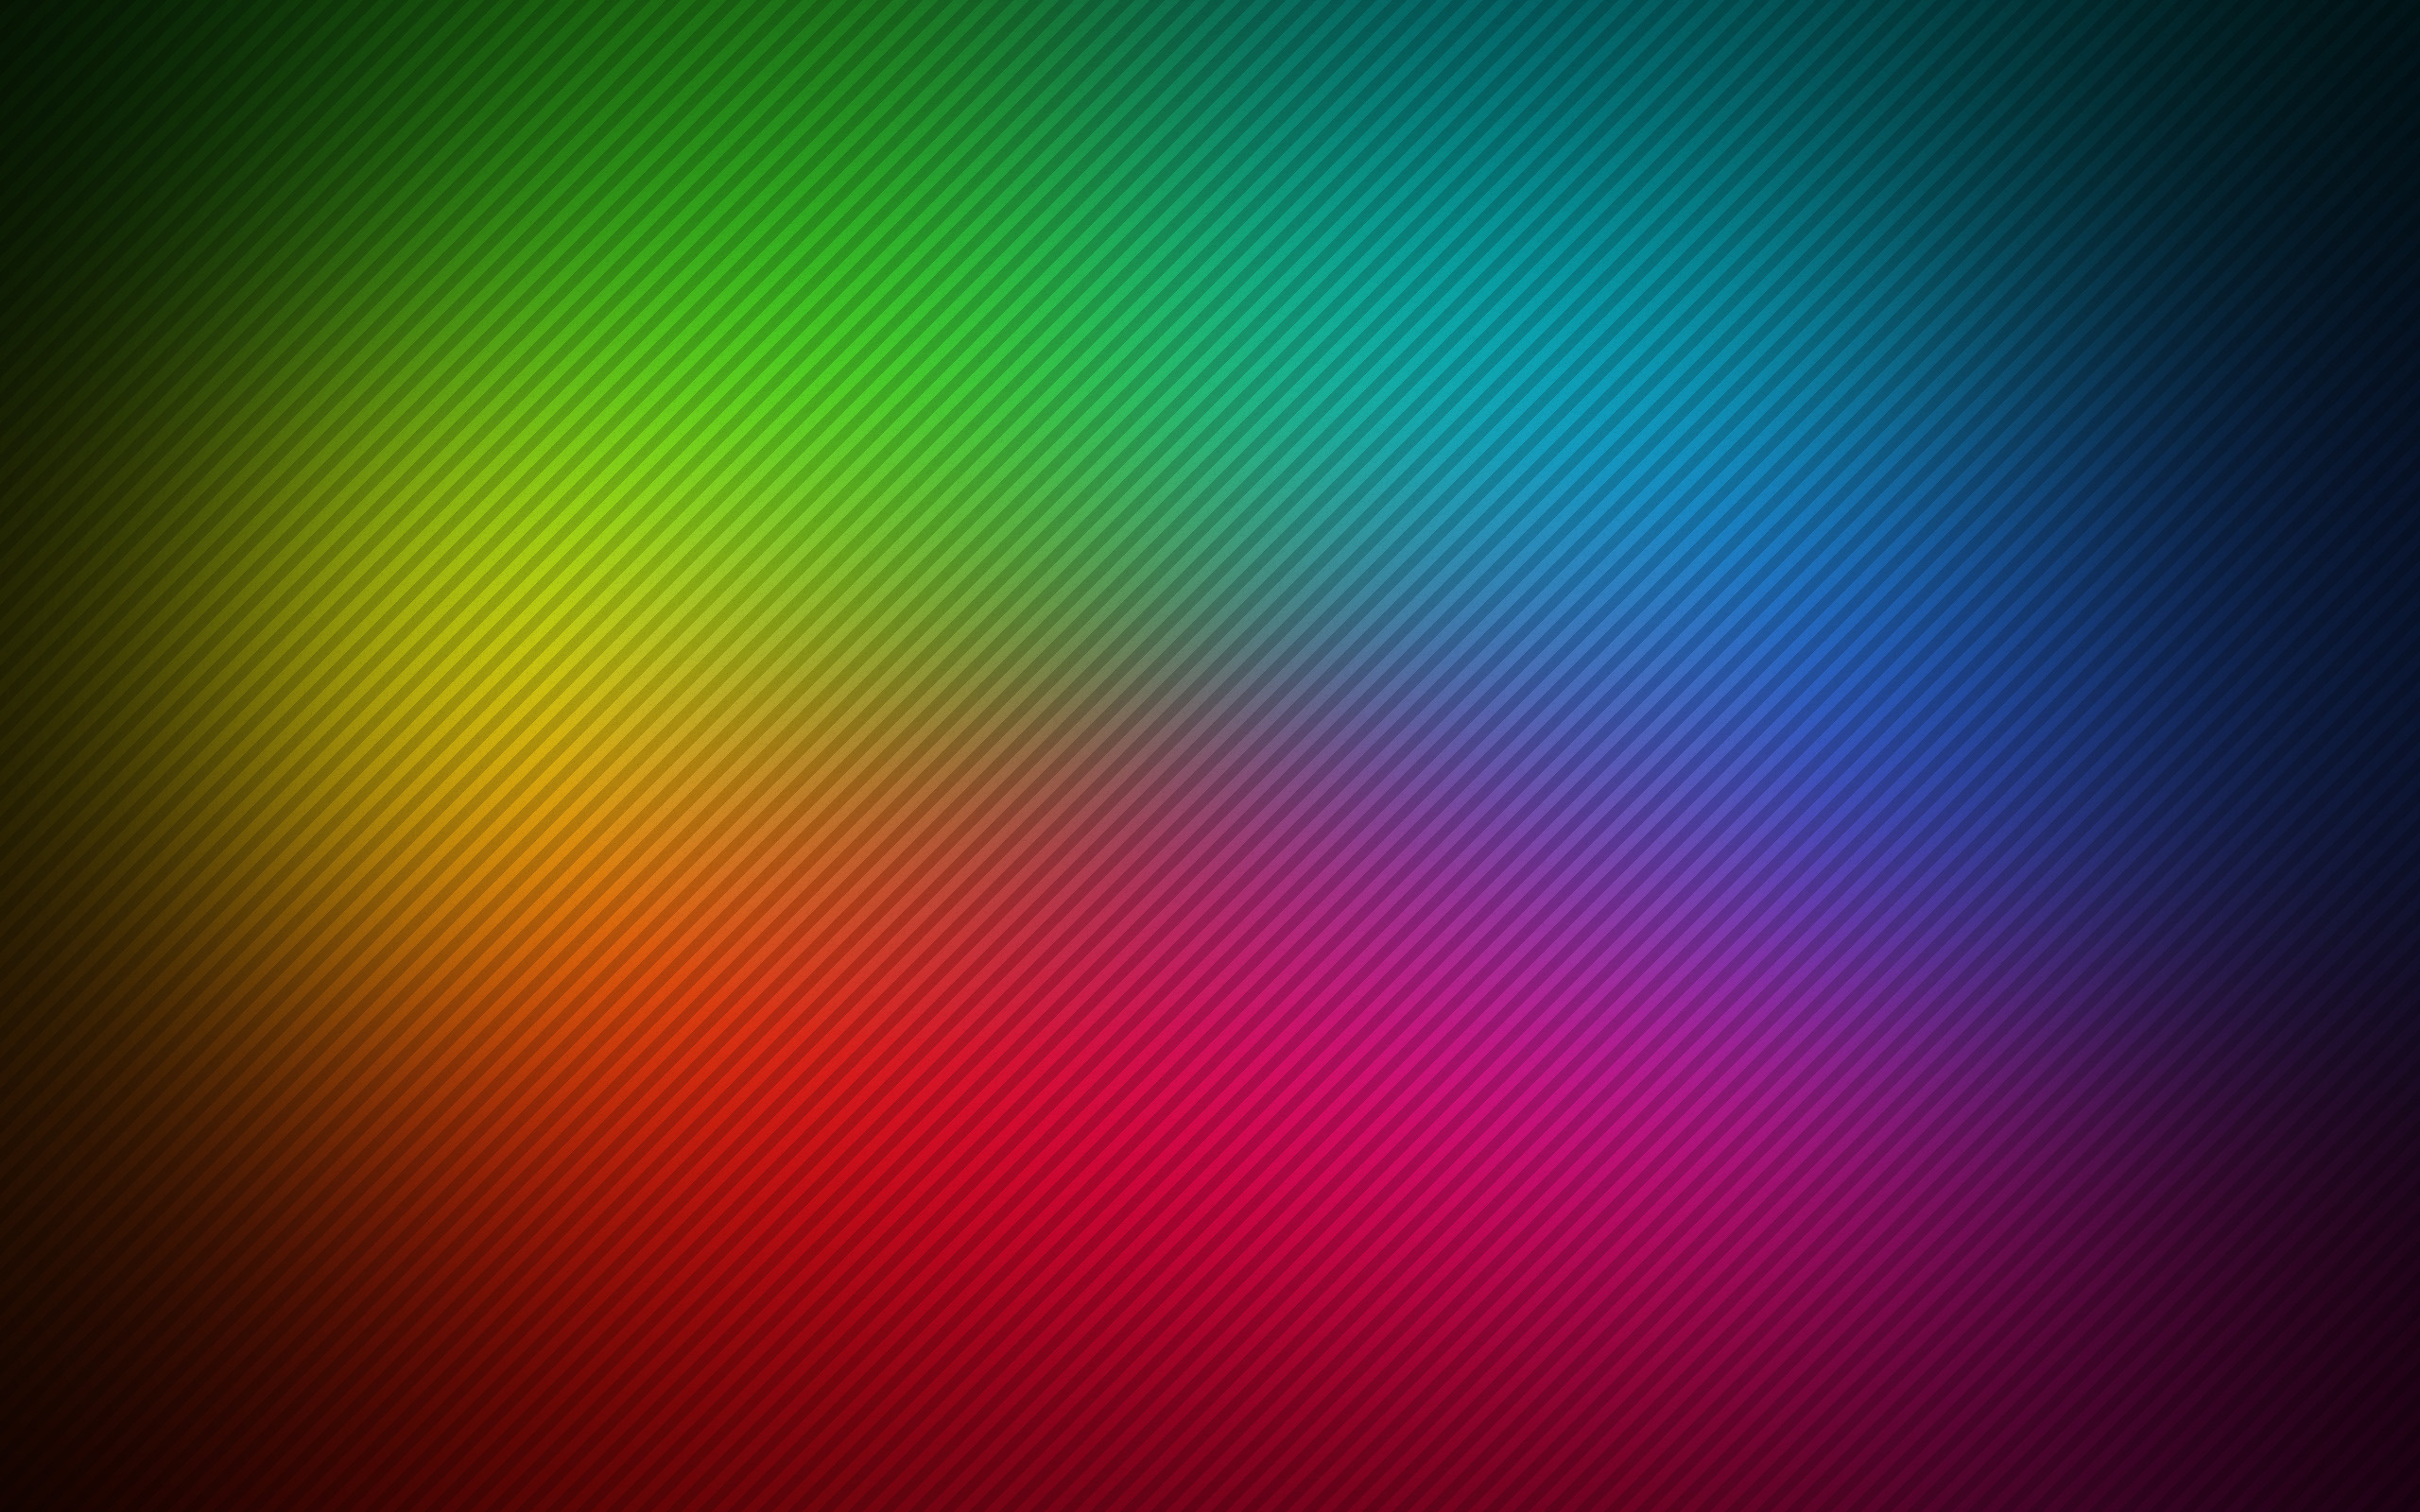 Bright Colored Desktop Background Submited Image